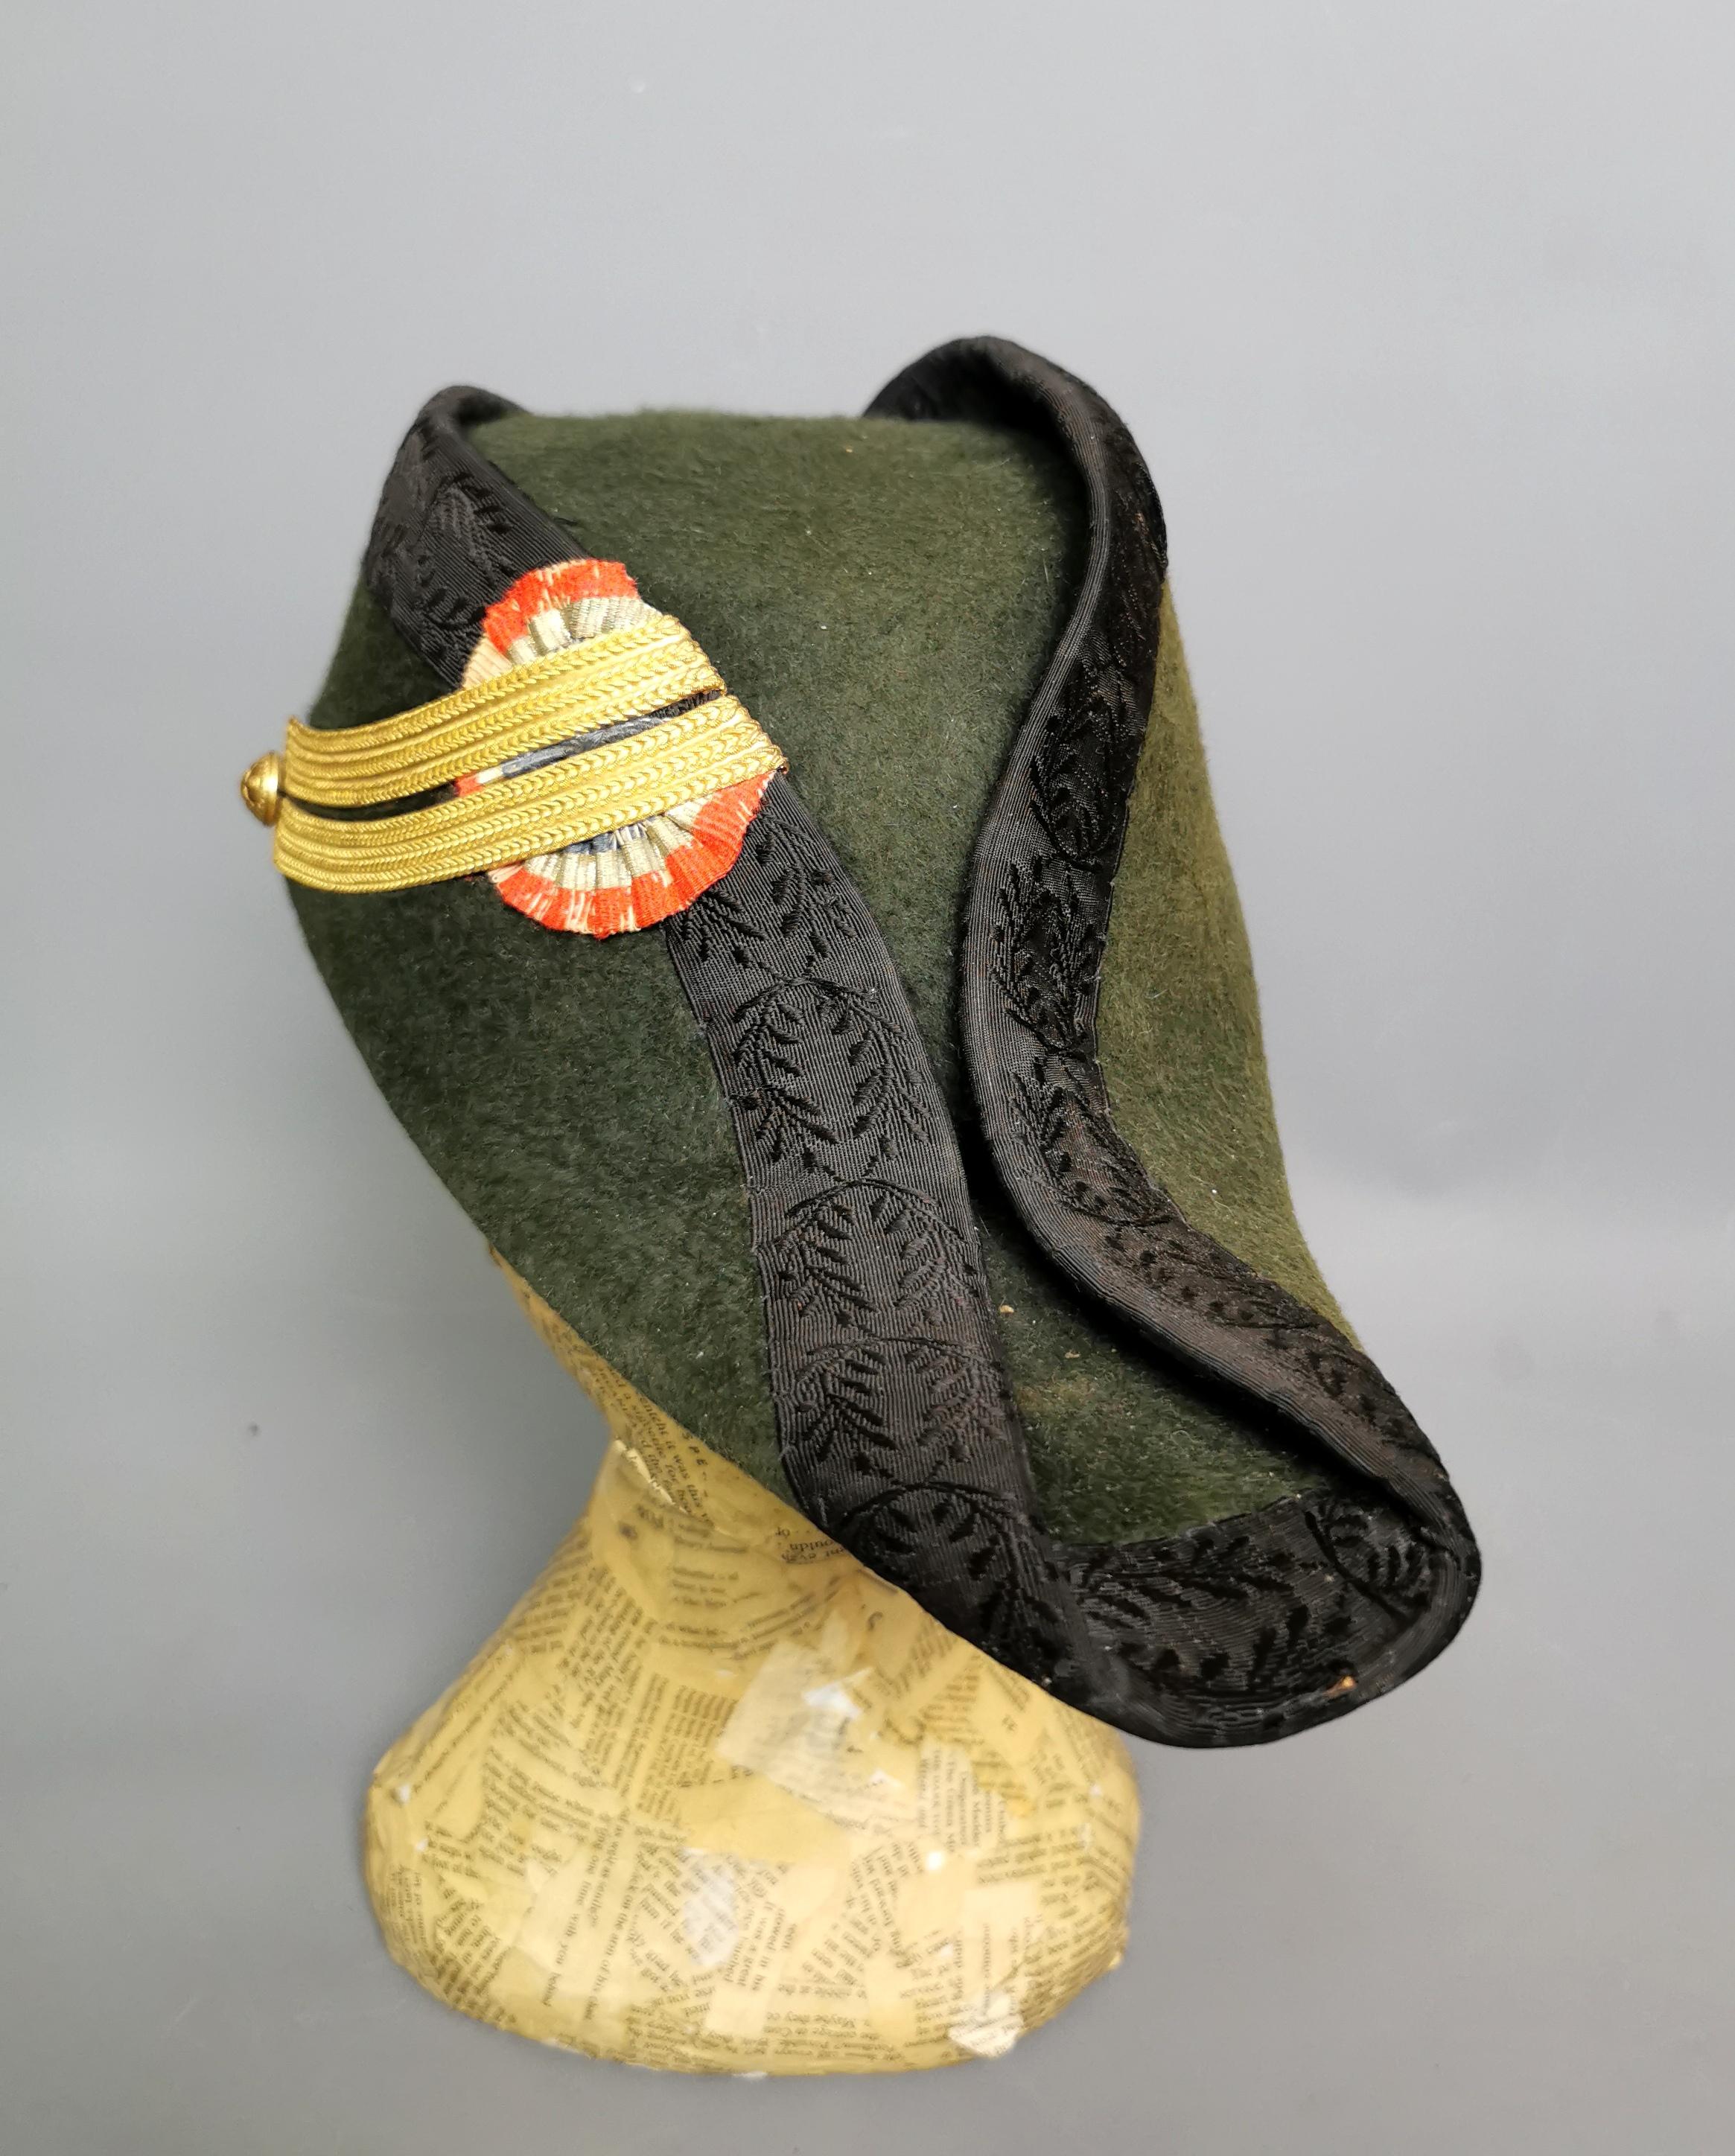 Antique French Military bicorn hat, 19th century  1